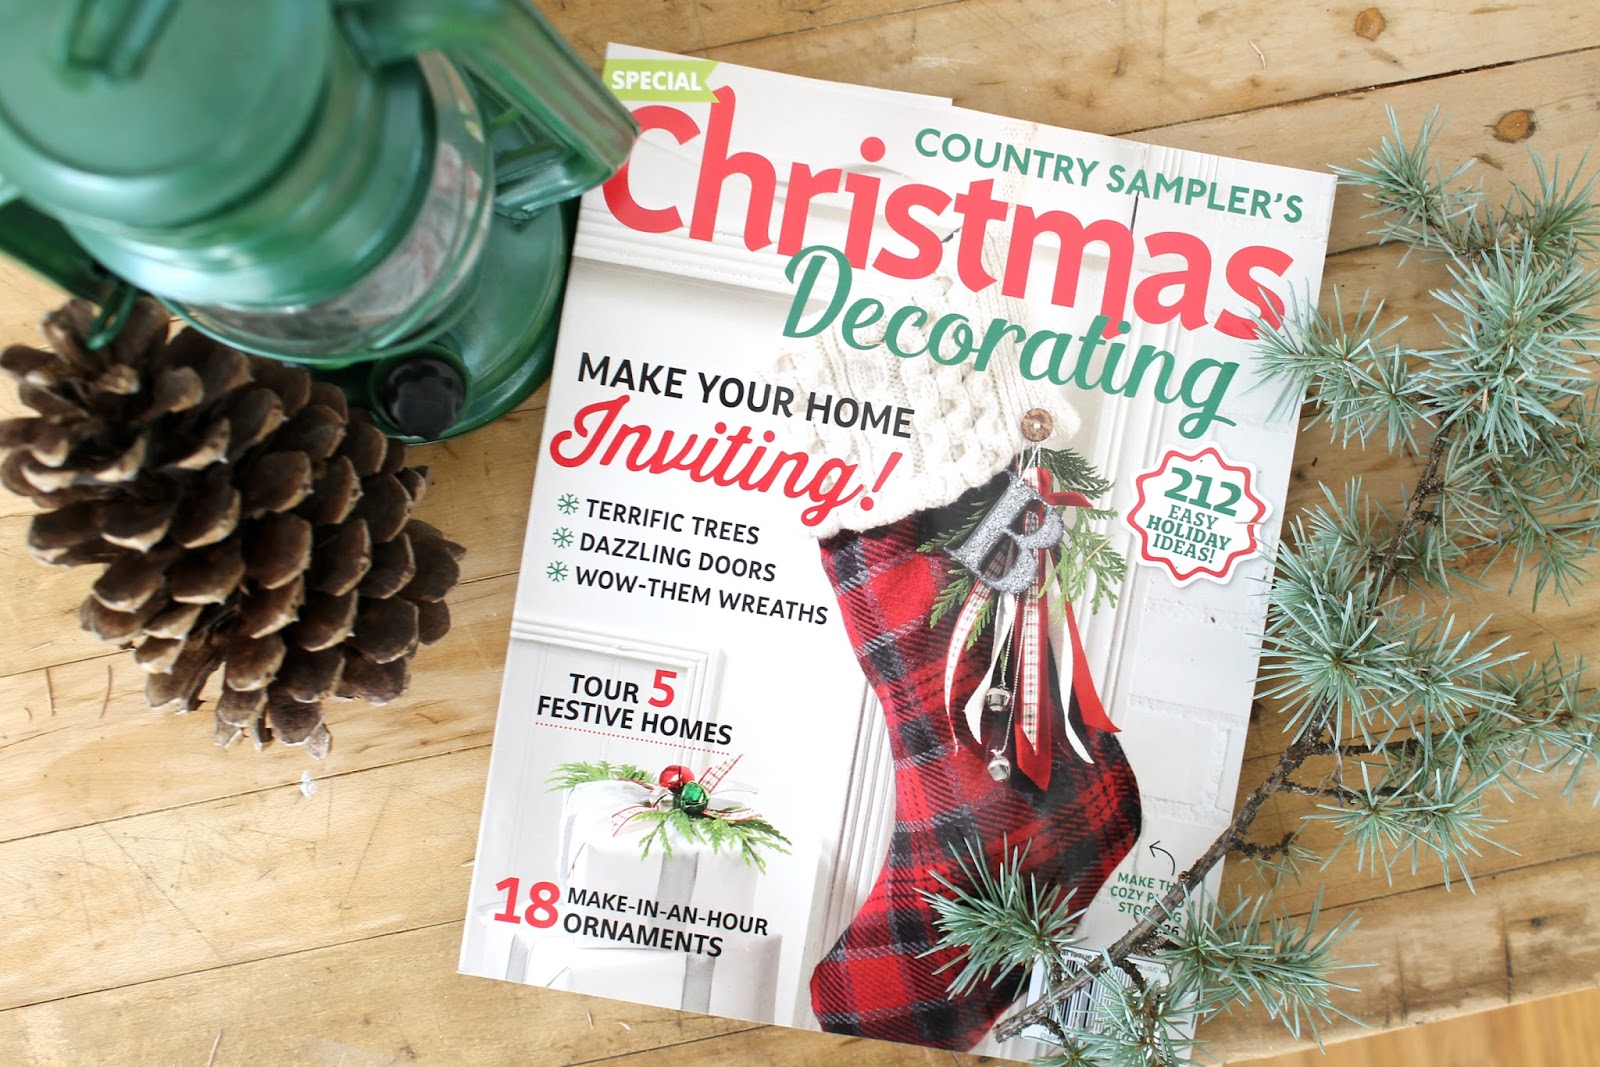 Featured in Country Sampler’s Christmas Decorating Magazine